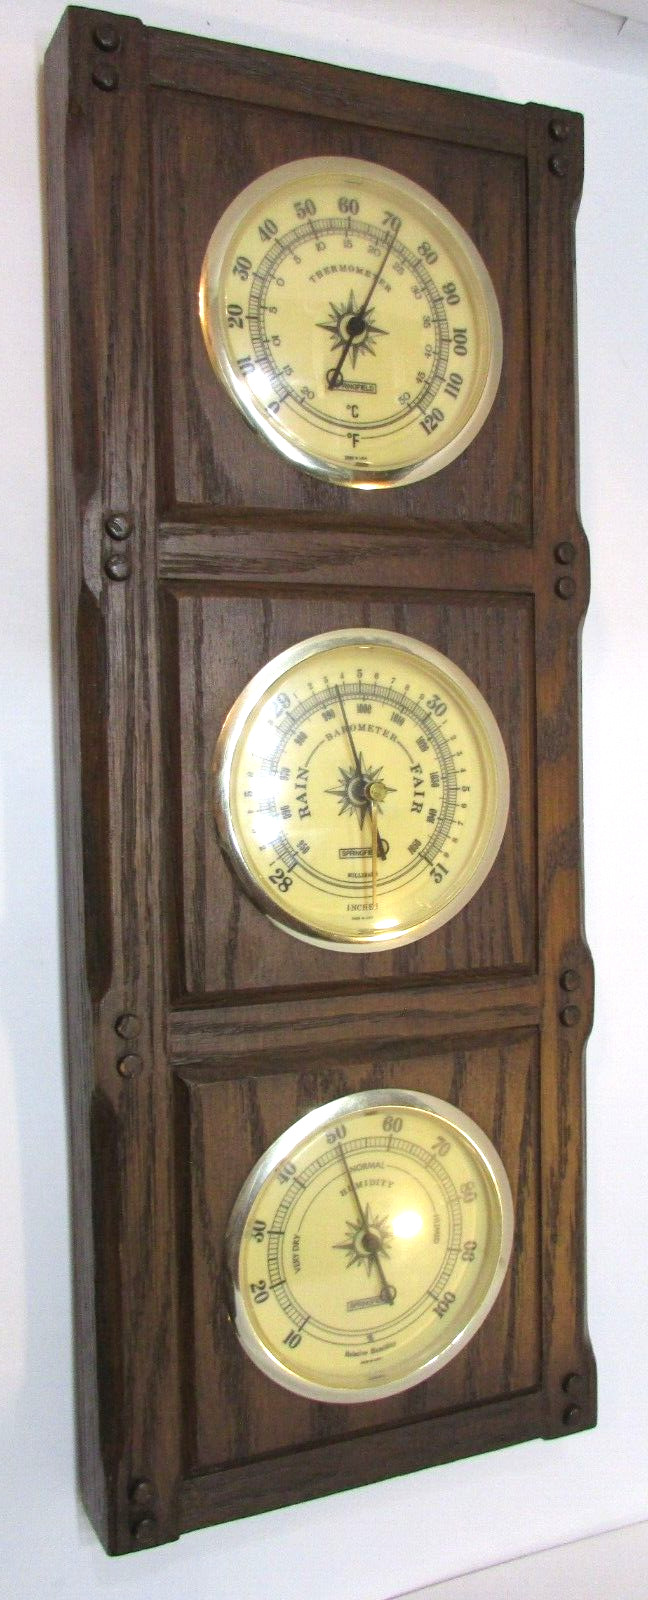 Vintage 1980's Working Springfield Plastic Wall Barometer Thermometer Hygrometer